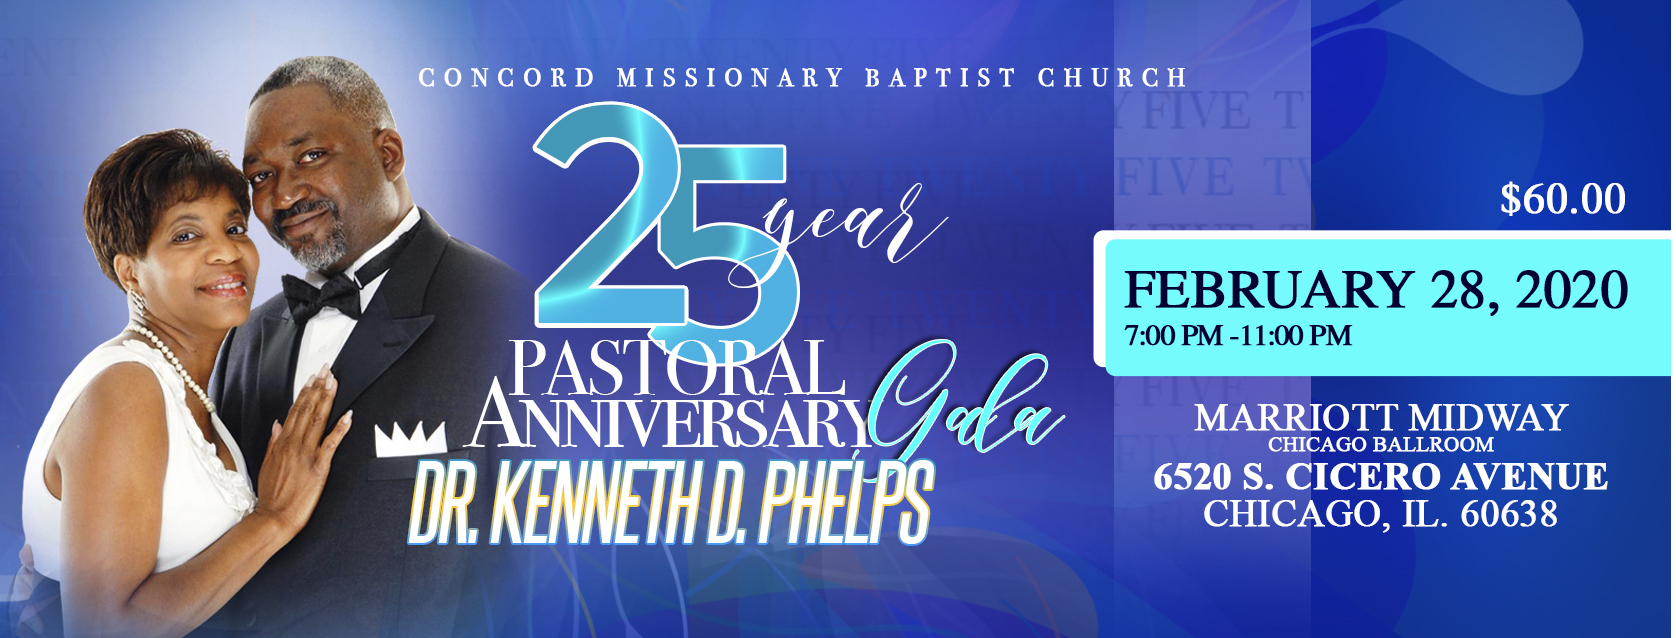 Dr Phelps 25th Anniversary Banquet Friday 228 7pm Dr Kenneth Phelps 0453